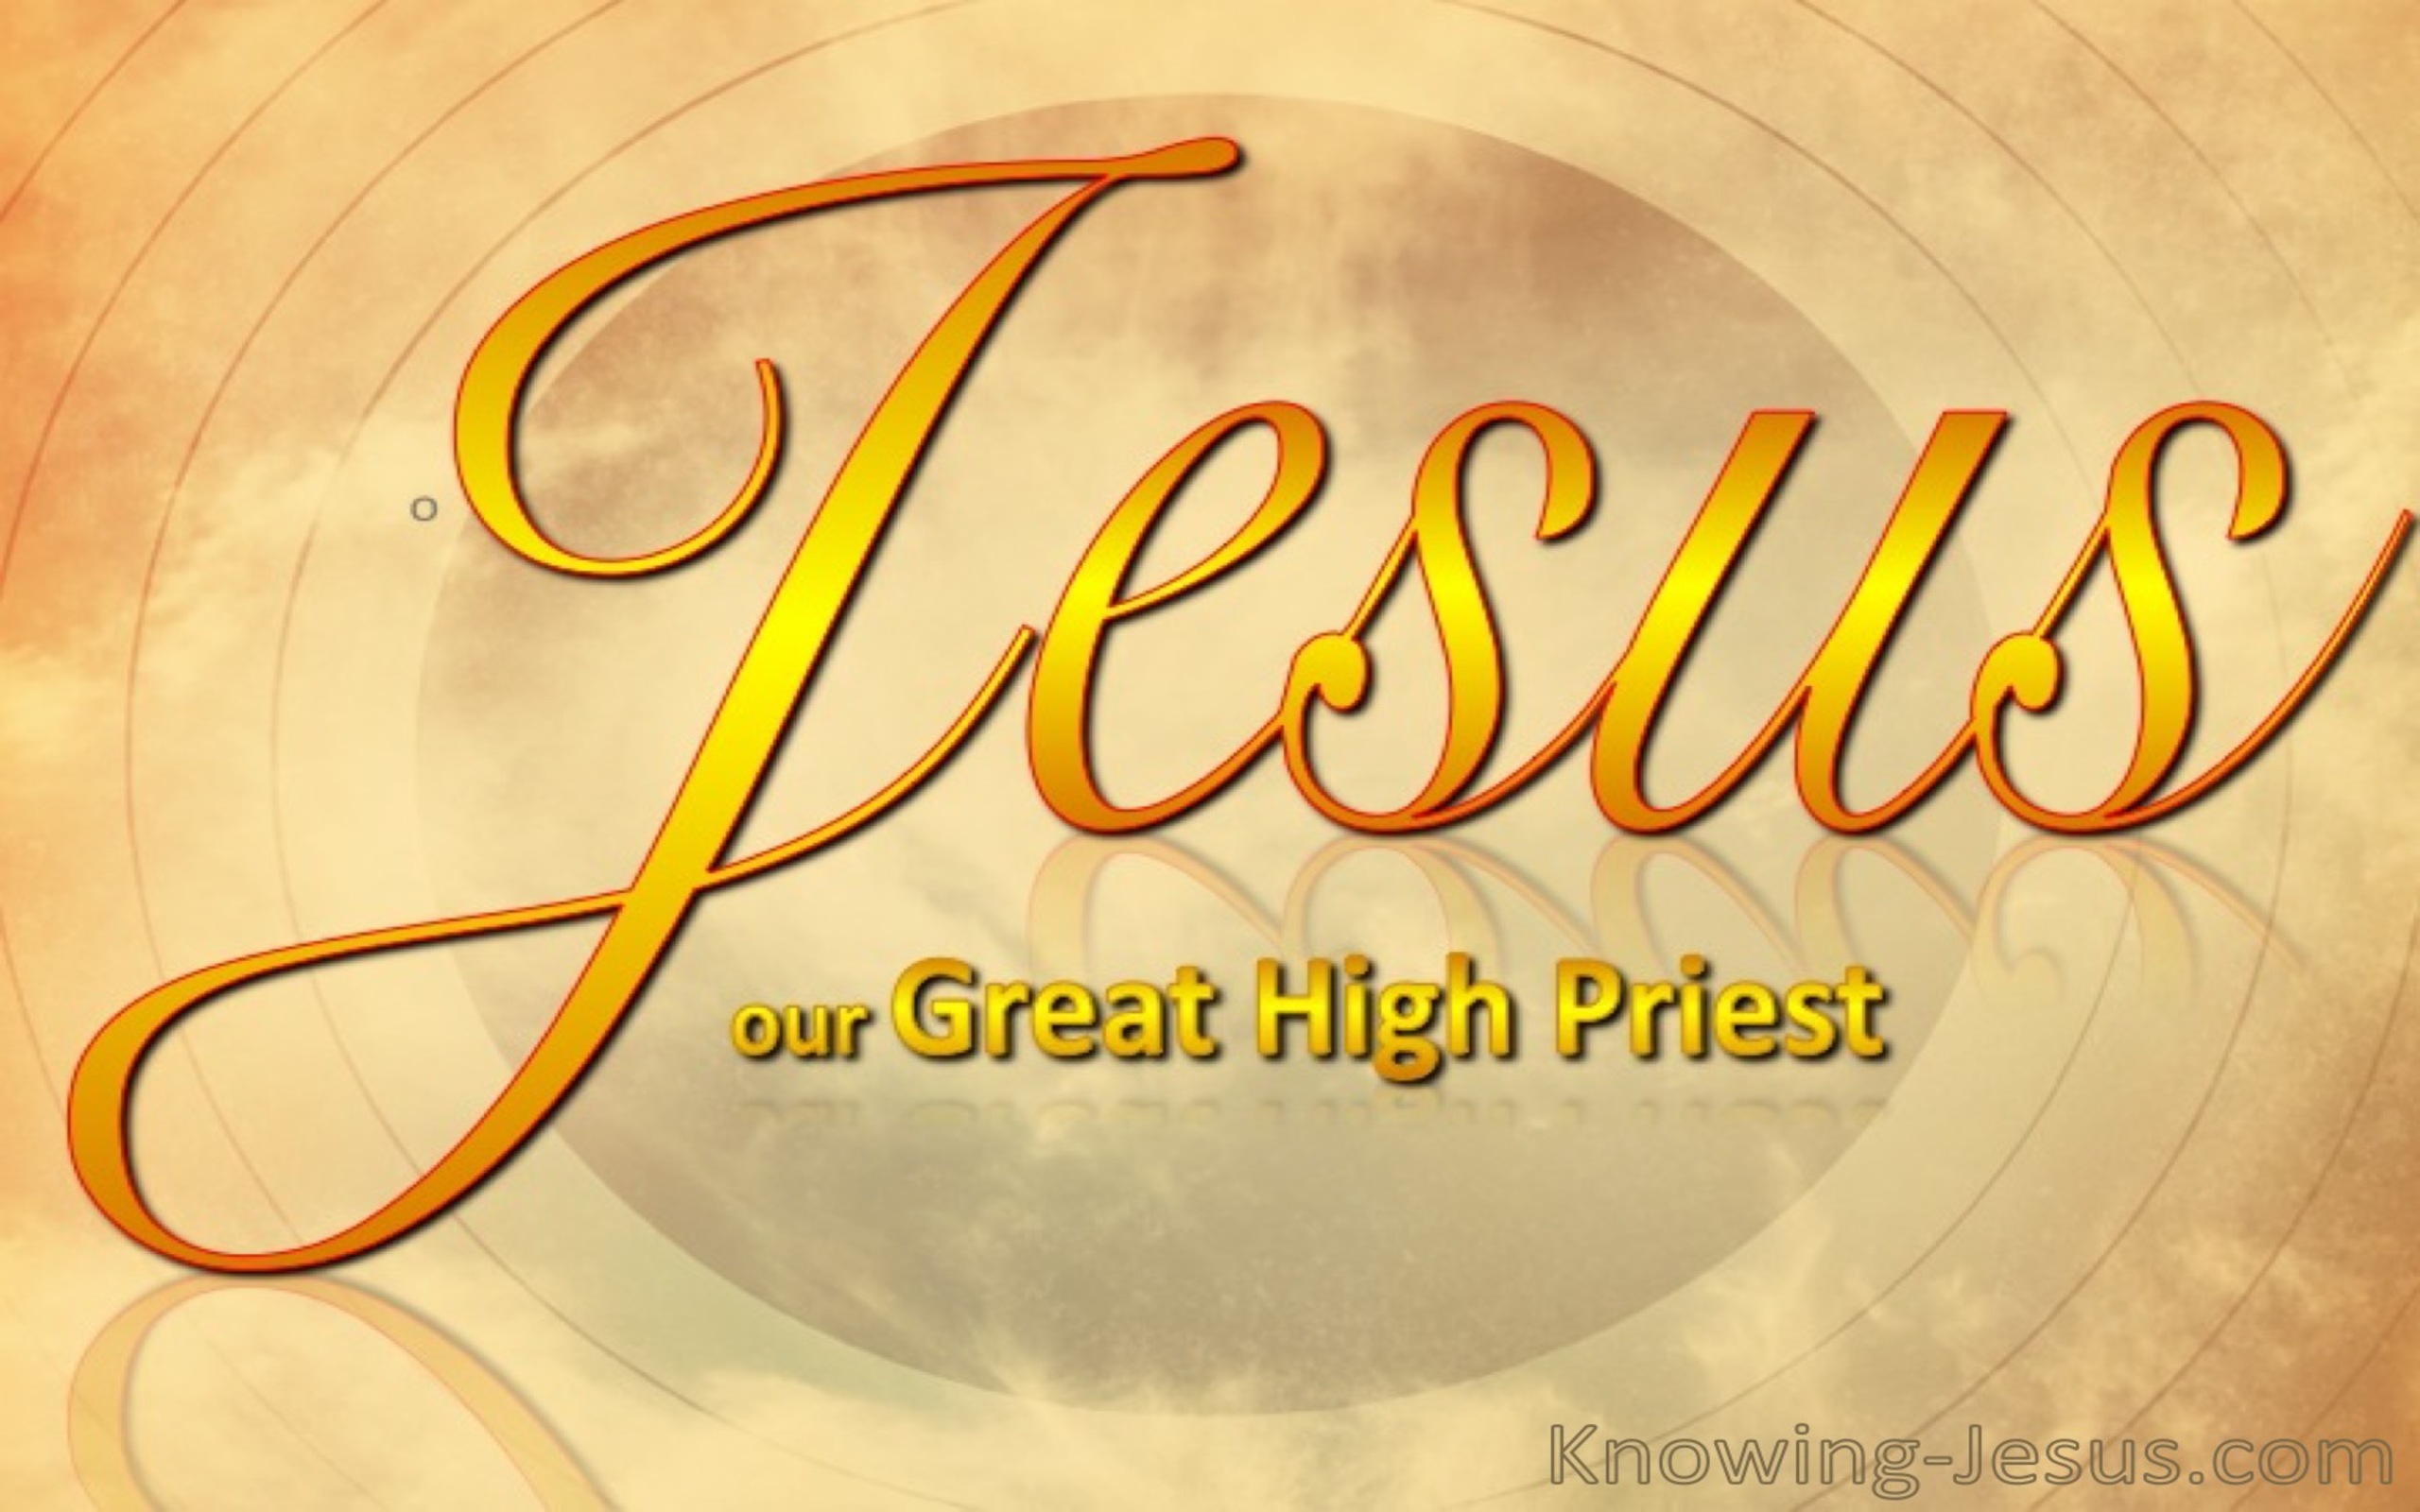 JESUS-the Great High Priest (gold)